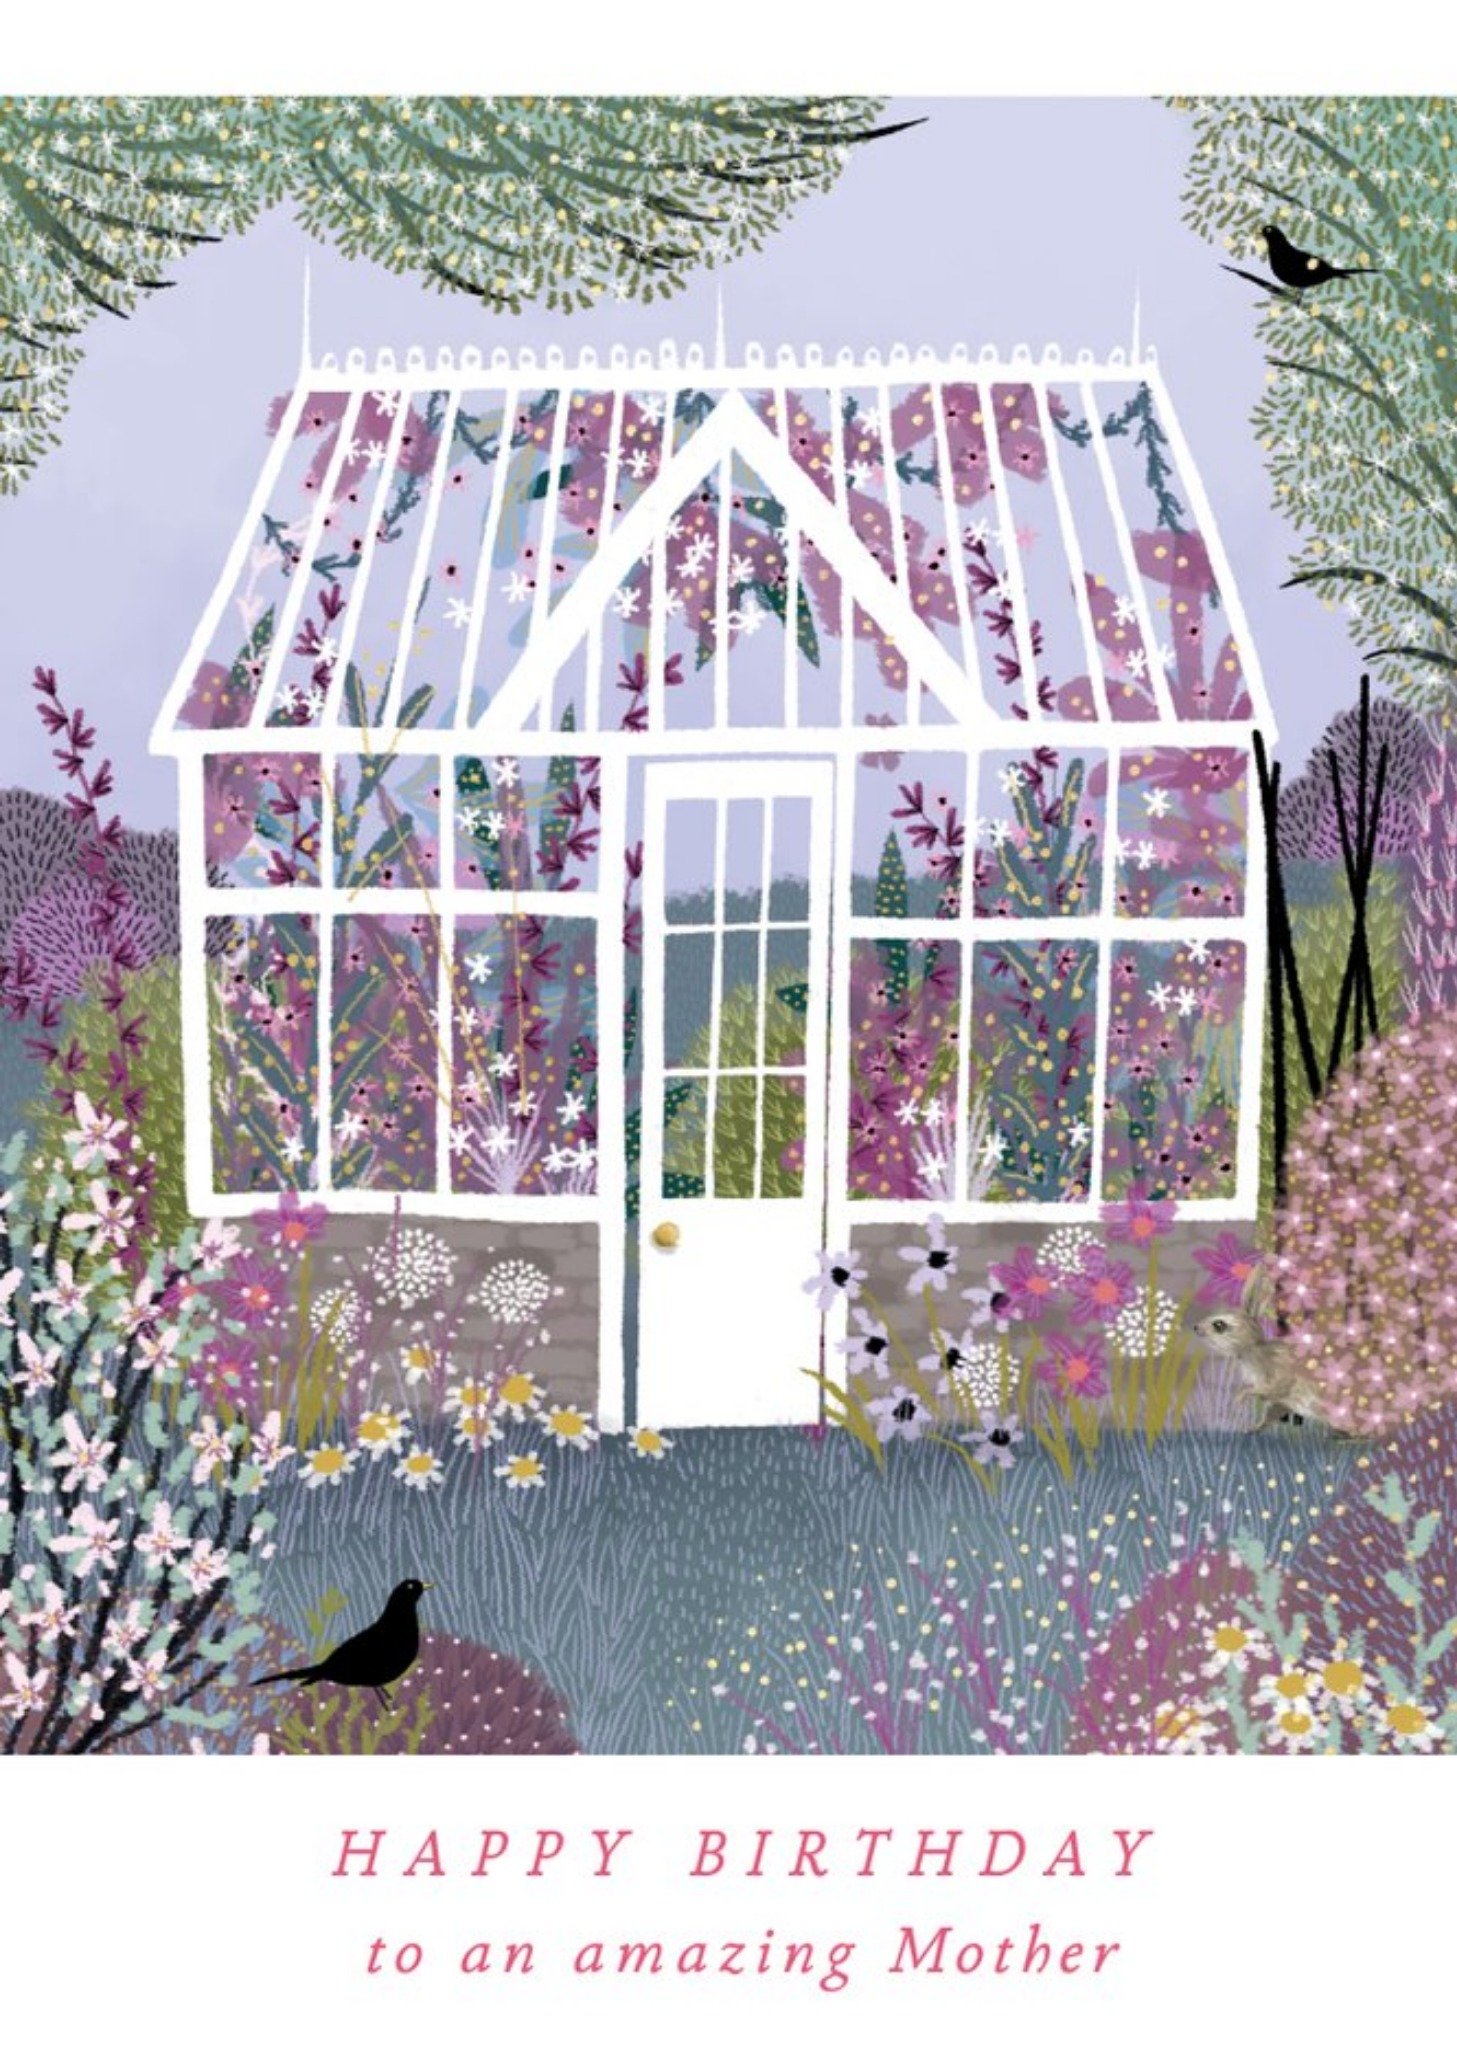 Moonpig Beautiful Illustration Of A Green House Filled With Flowers Mother's Birthday Card, Large